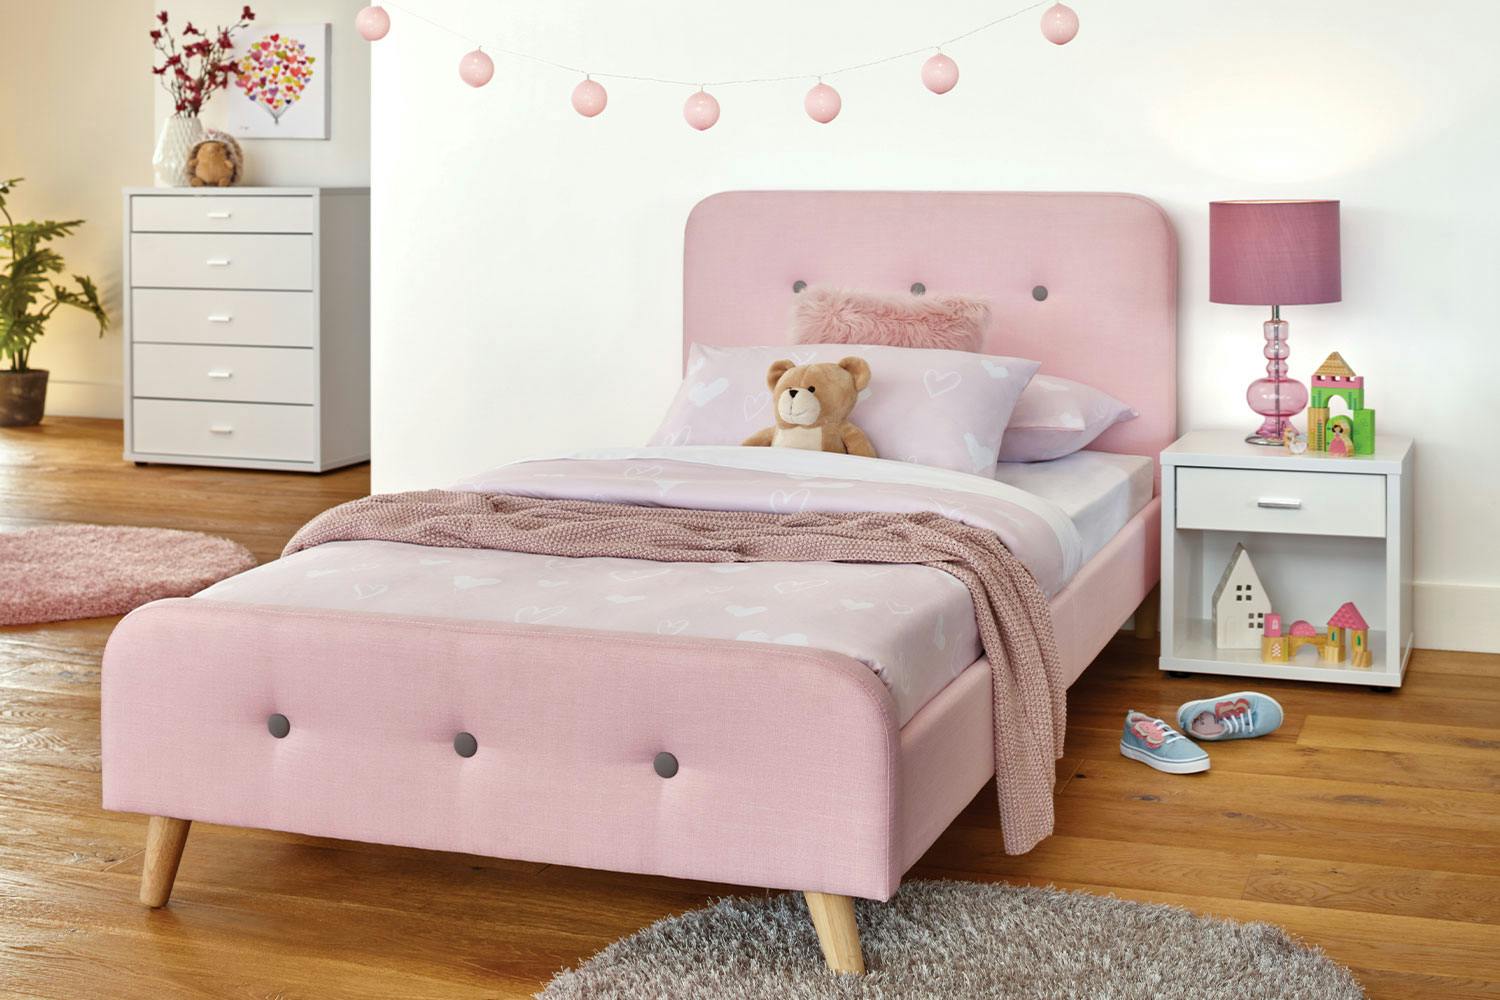 Adairs Kids - Darcy Pink Bed - Single, King Single, Double